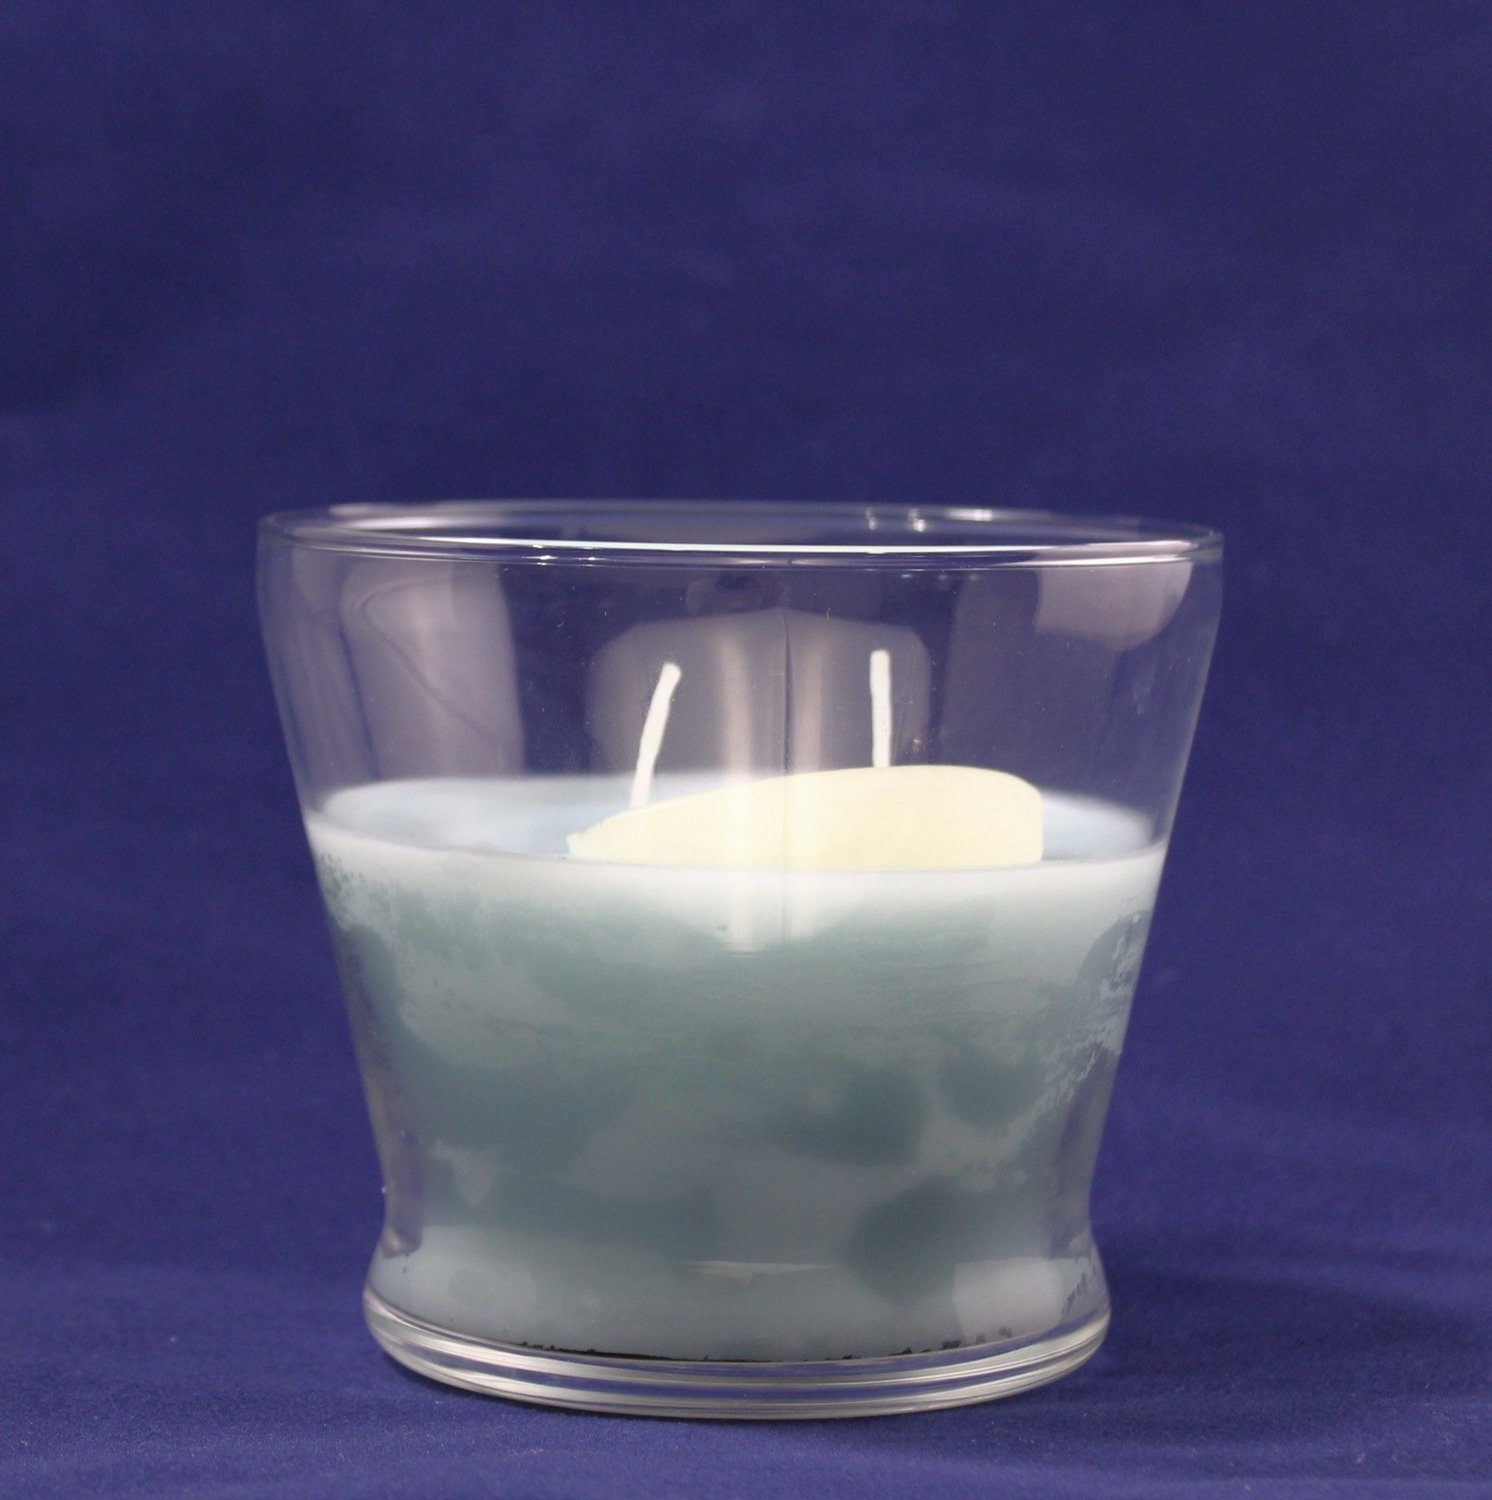 Black Cherry Scented Wax Candle In Flower Pot Glass - 2 wick